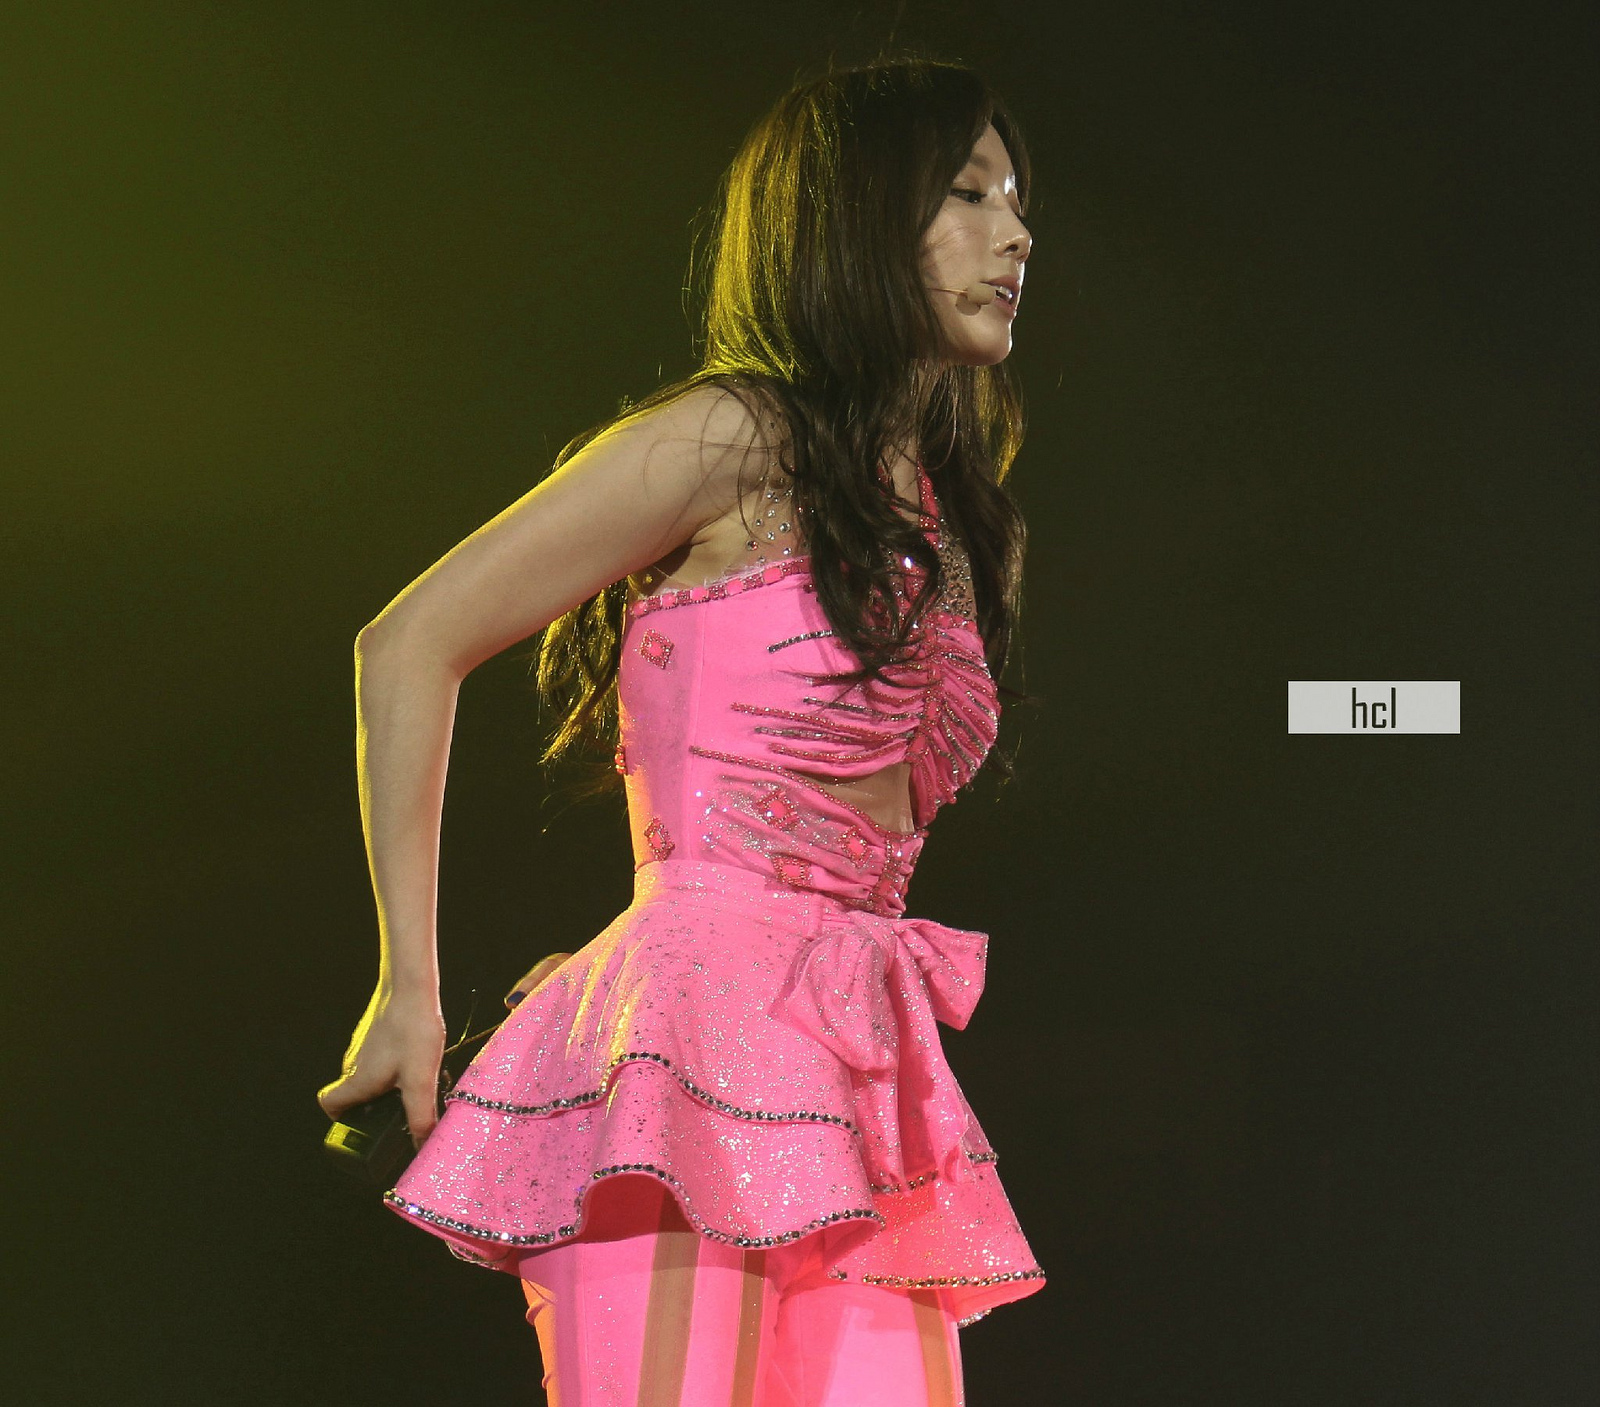 131109-10 G&P in HK 태연 직찍 by ffanypack, Hcl